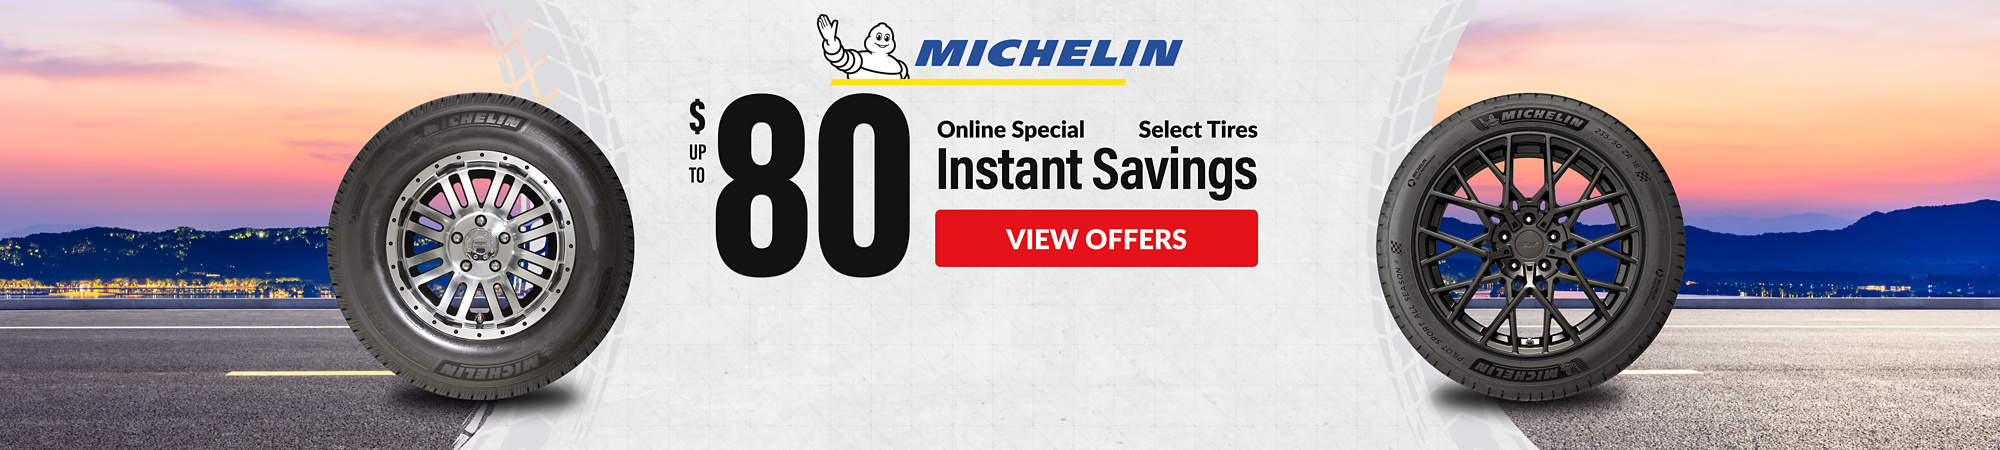 Discount Tires - Save Up to $80 on Auto Tires!